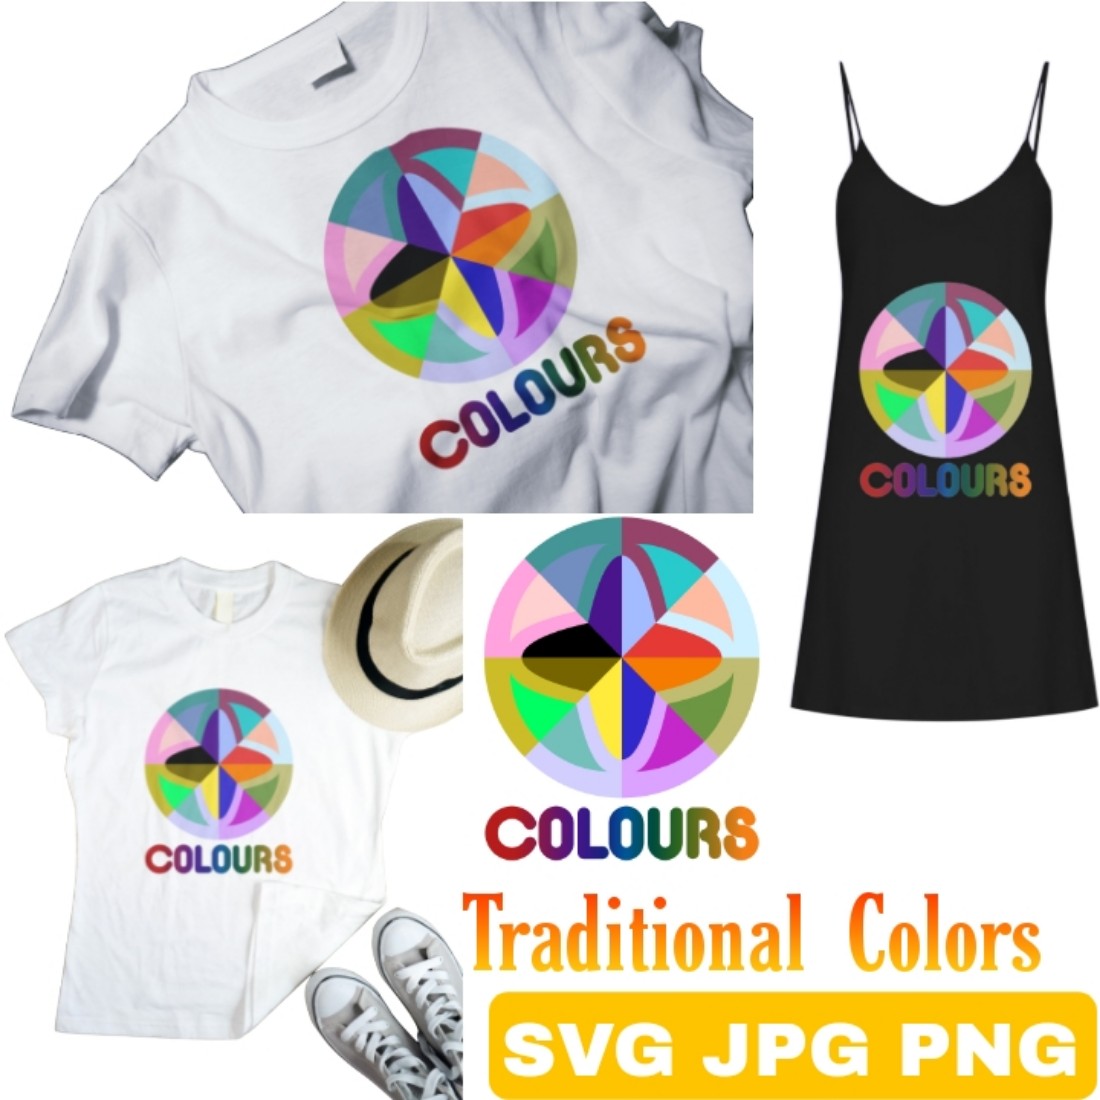 Traditional Colors T-shirt Design SVG File cover image.